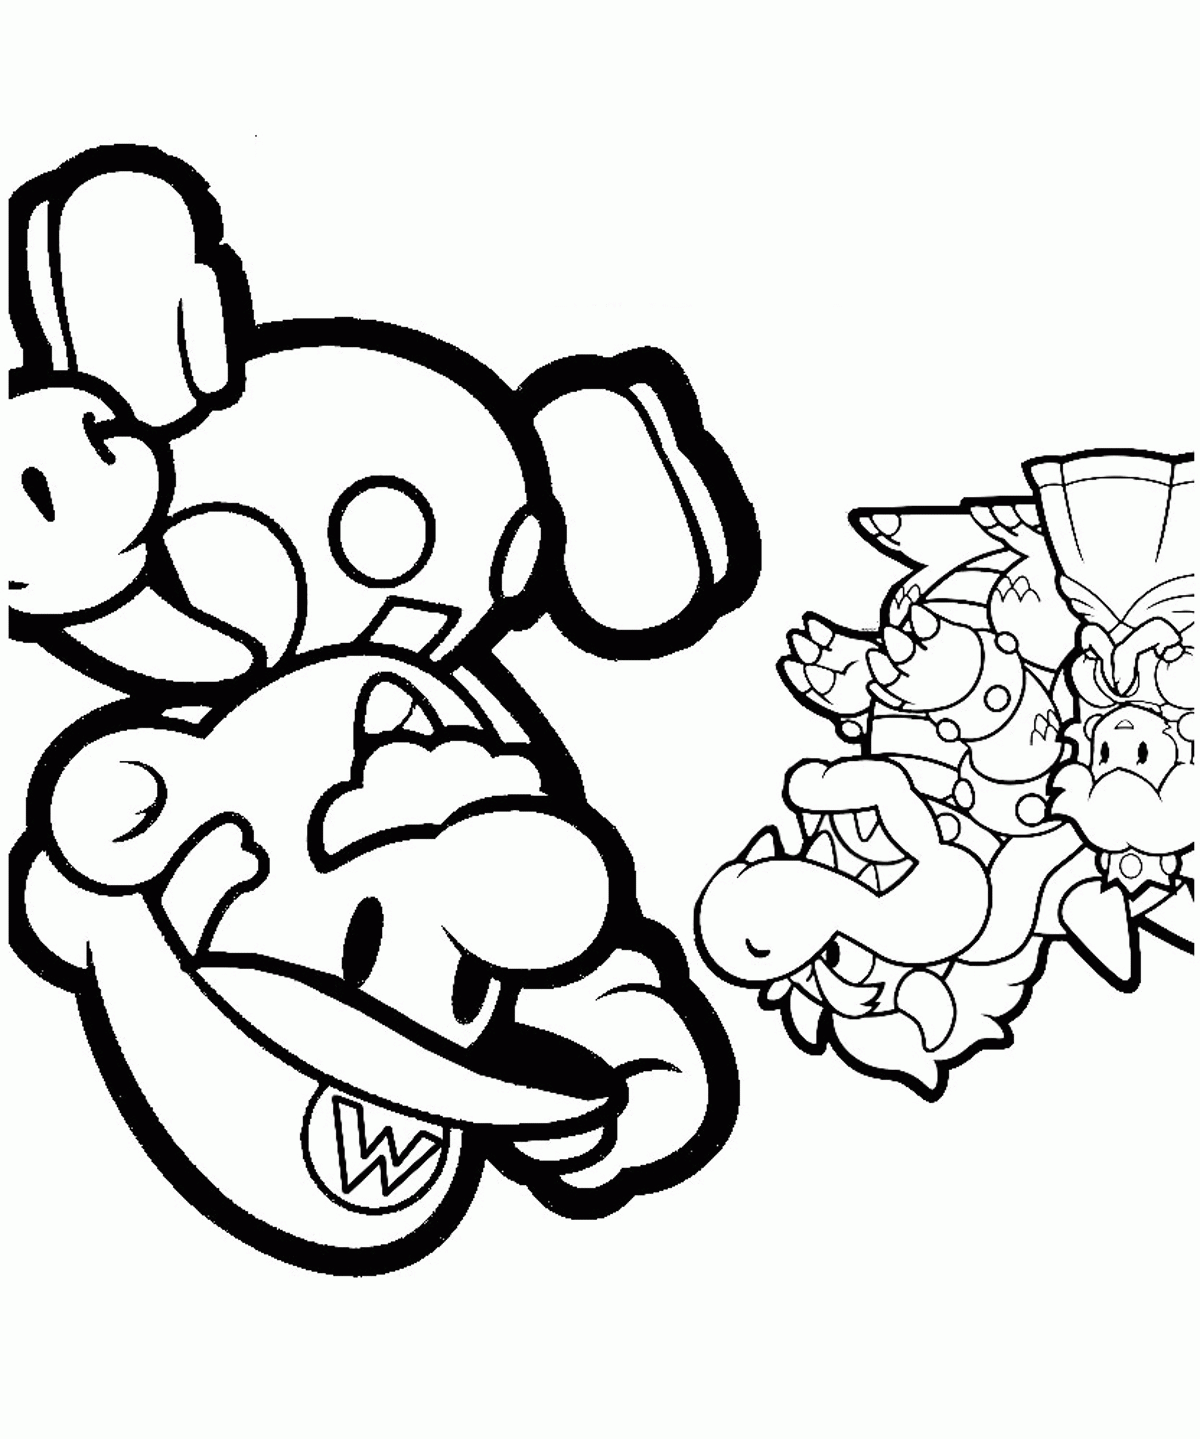 mario coloring pages to print - Clip Art Library